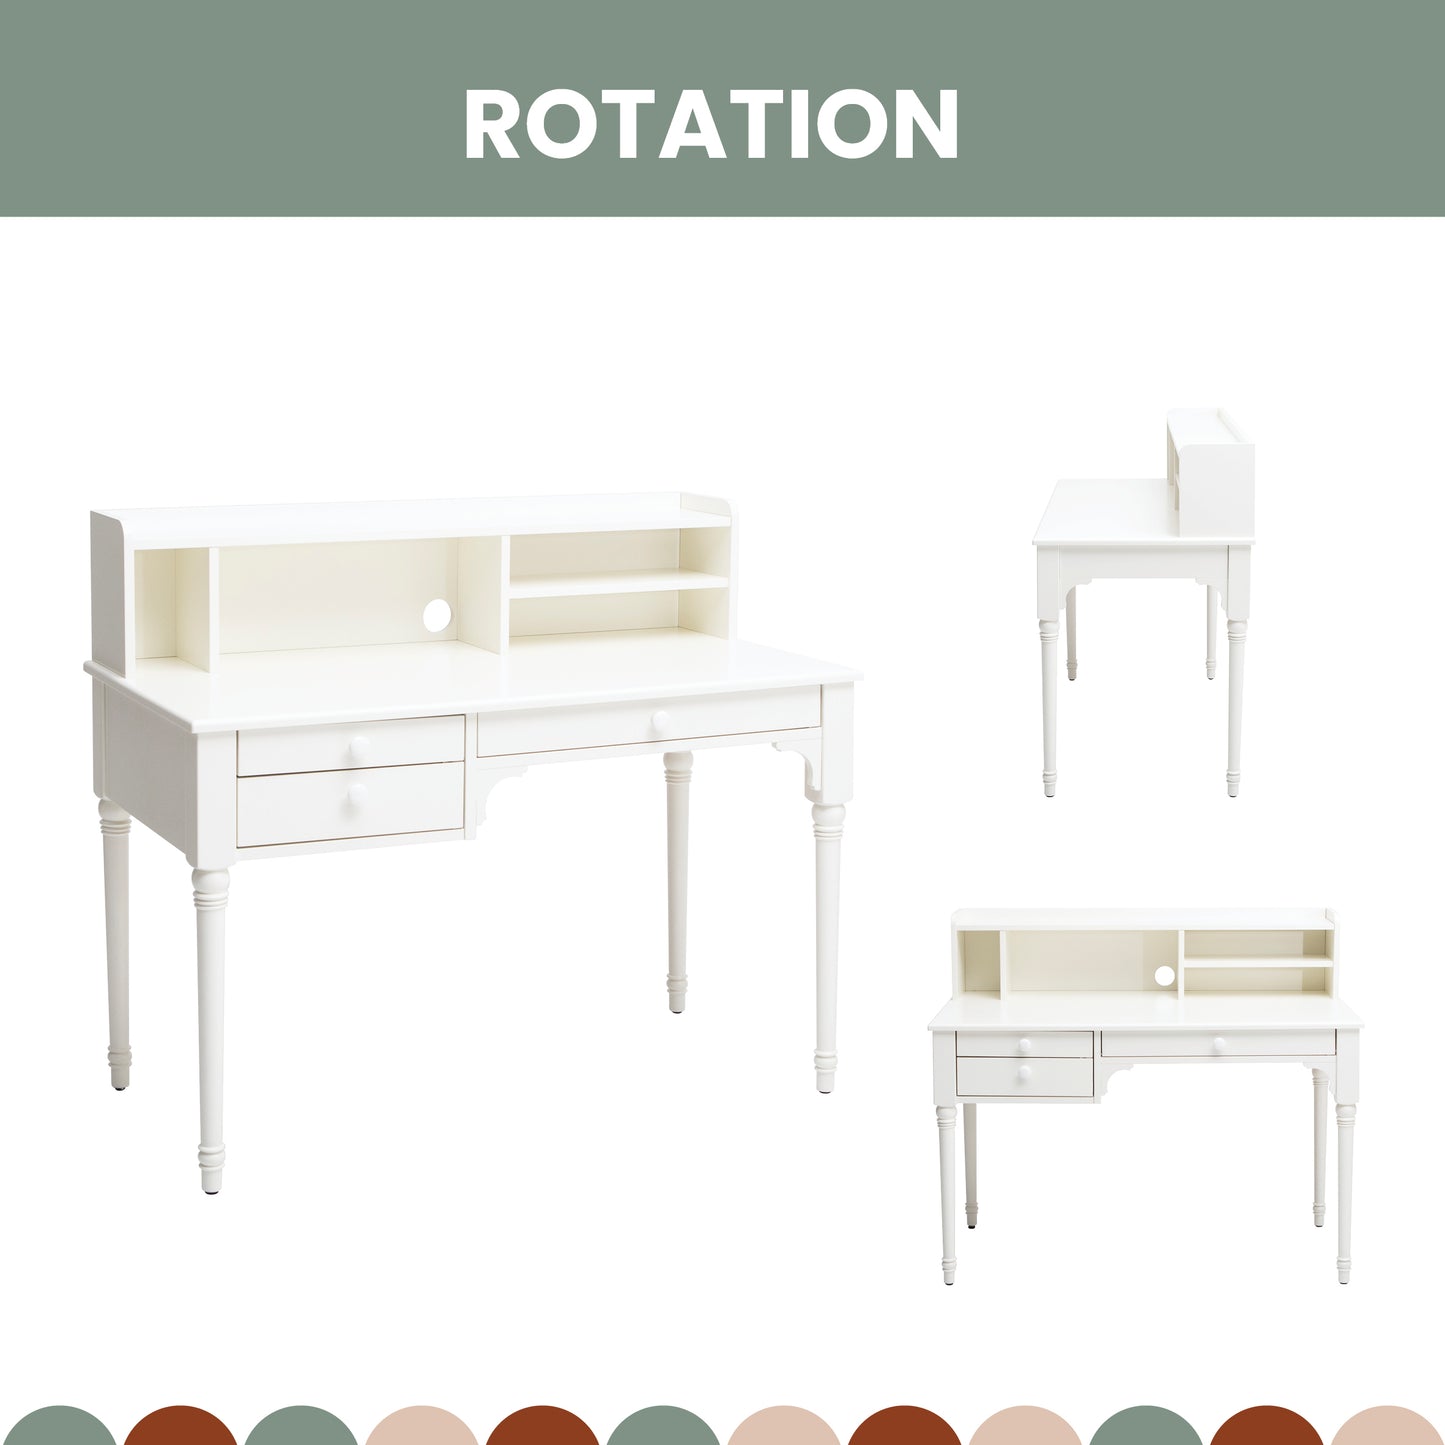 Three views of a versatile Pedestal desk with shelves, drawers, and cable management, shown in different rotations. Text at top reads "ROTATION".